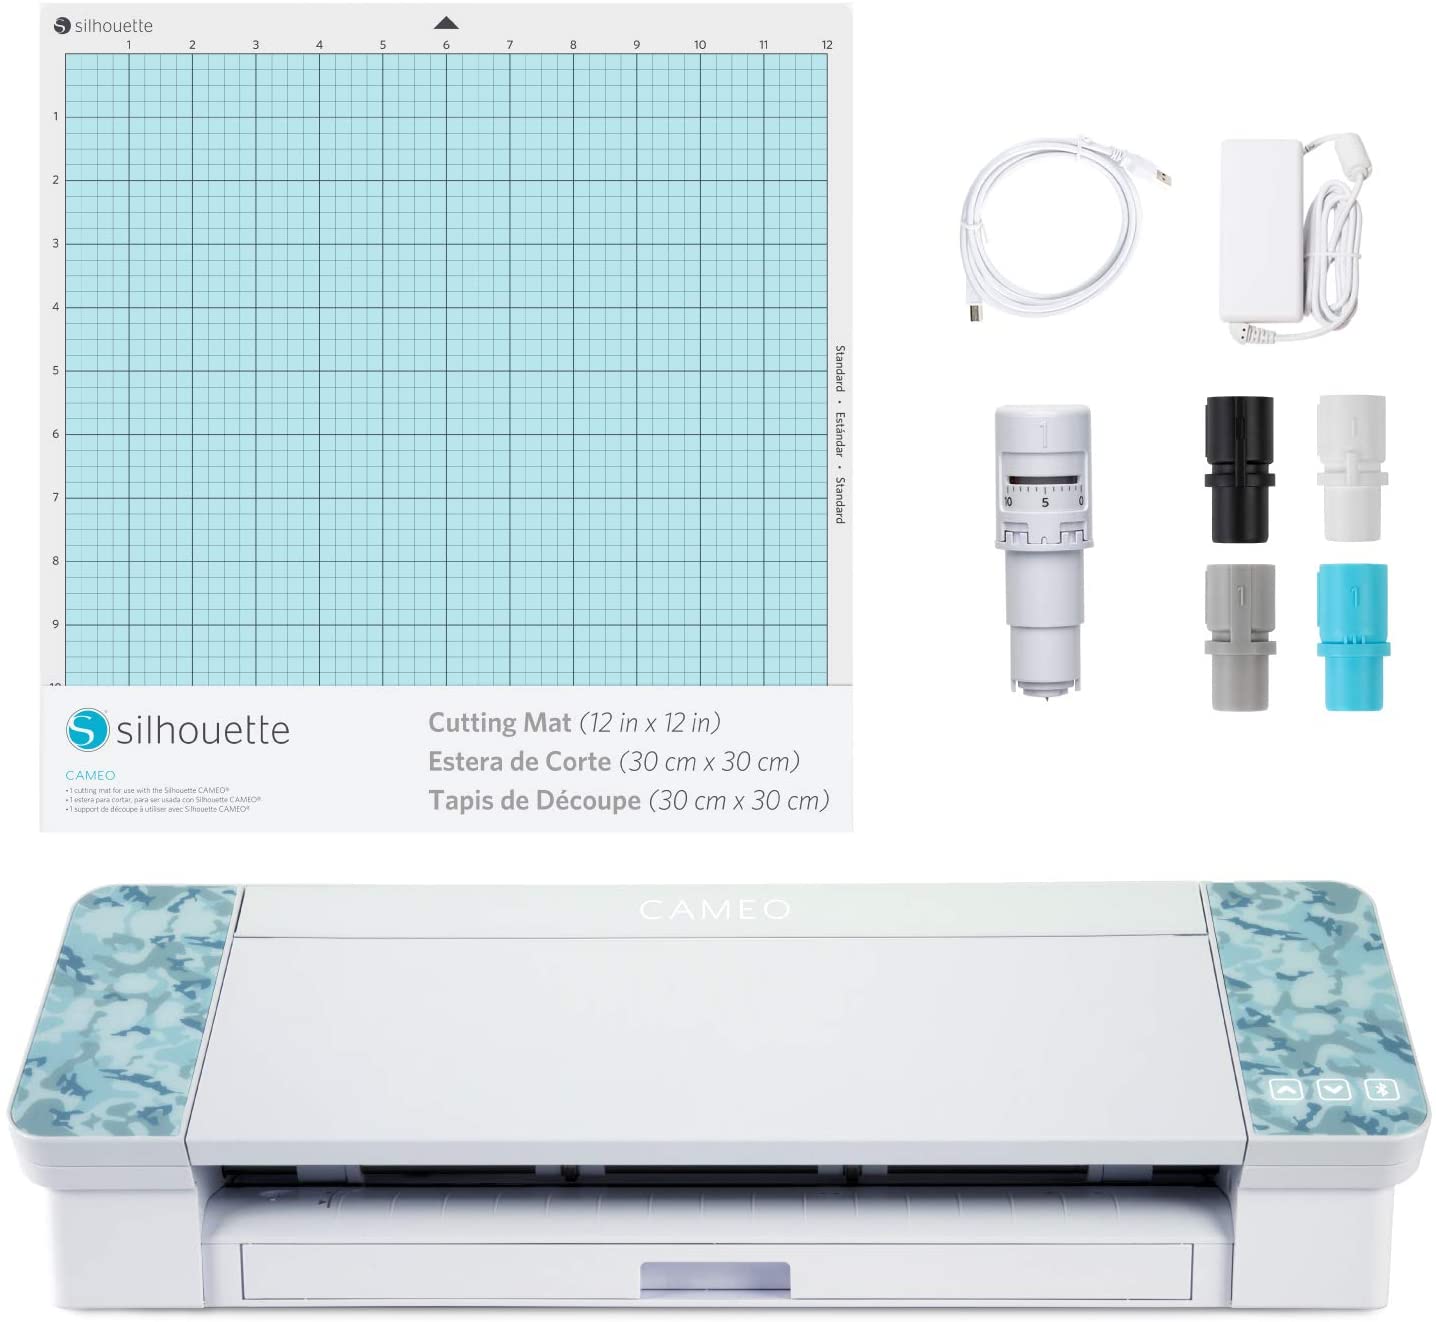 Overview of the Silhouette CAMEO Autoblade 